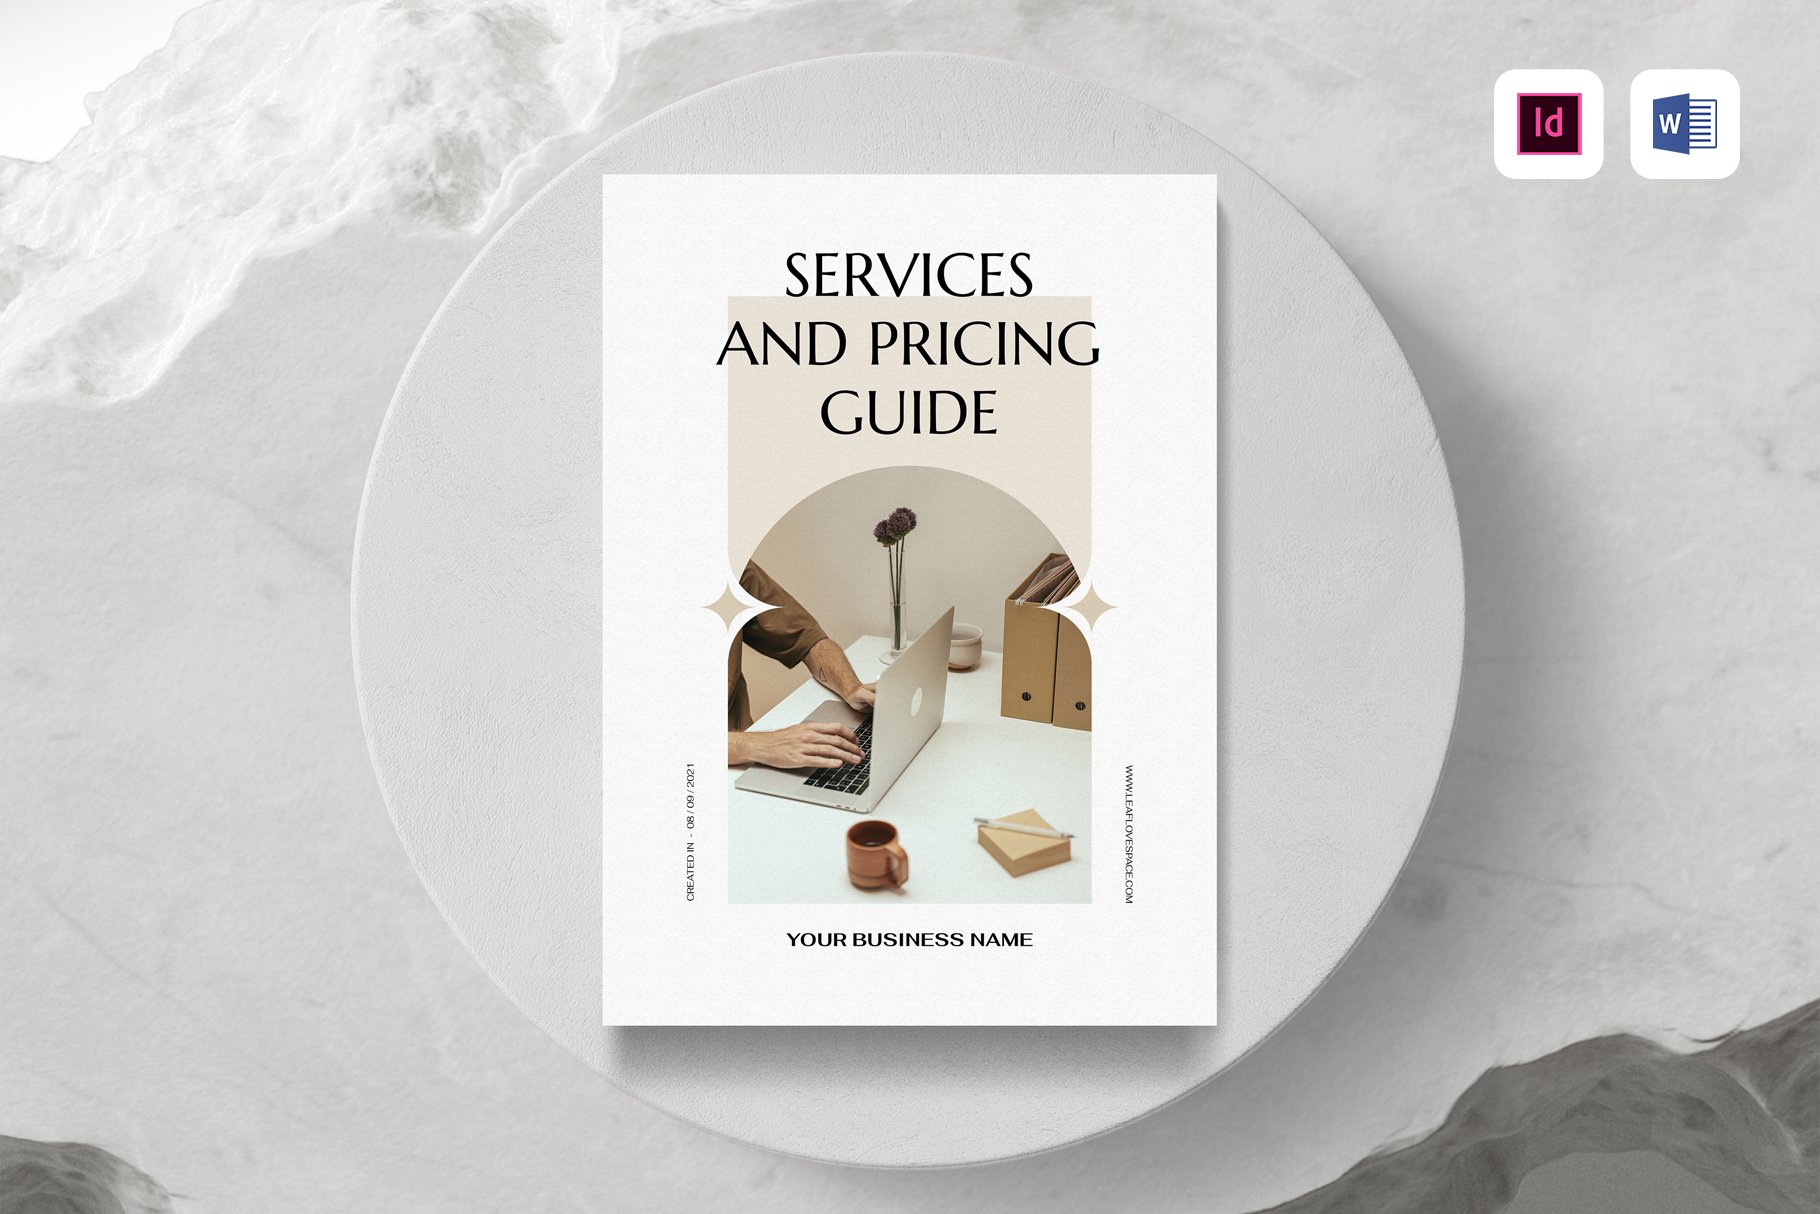 Services and Pricing Guide cover image.